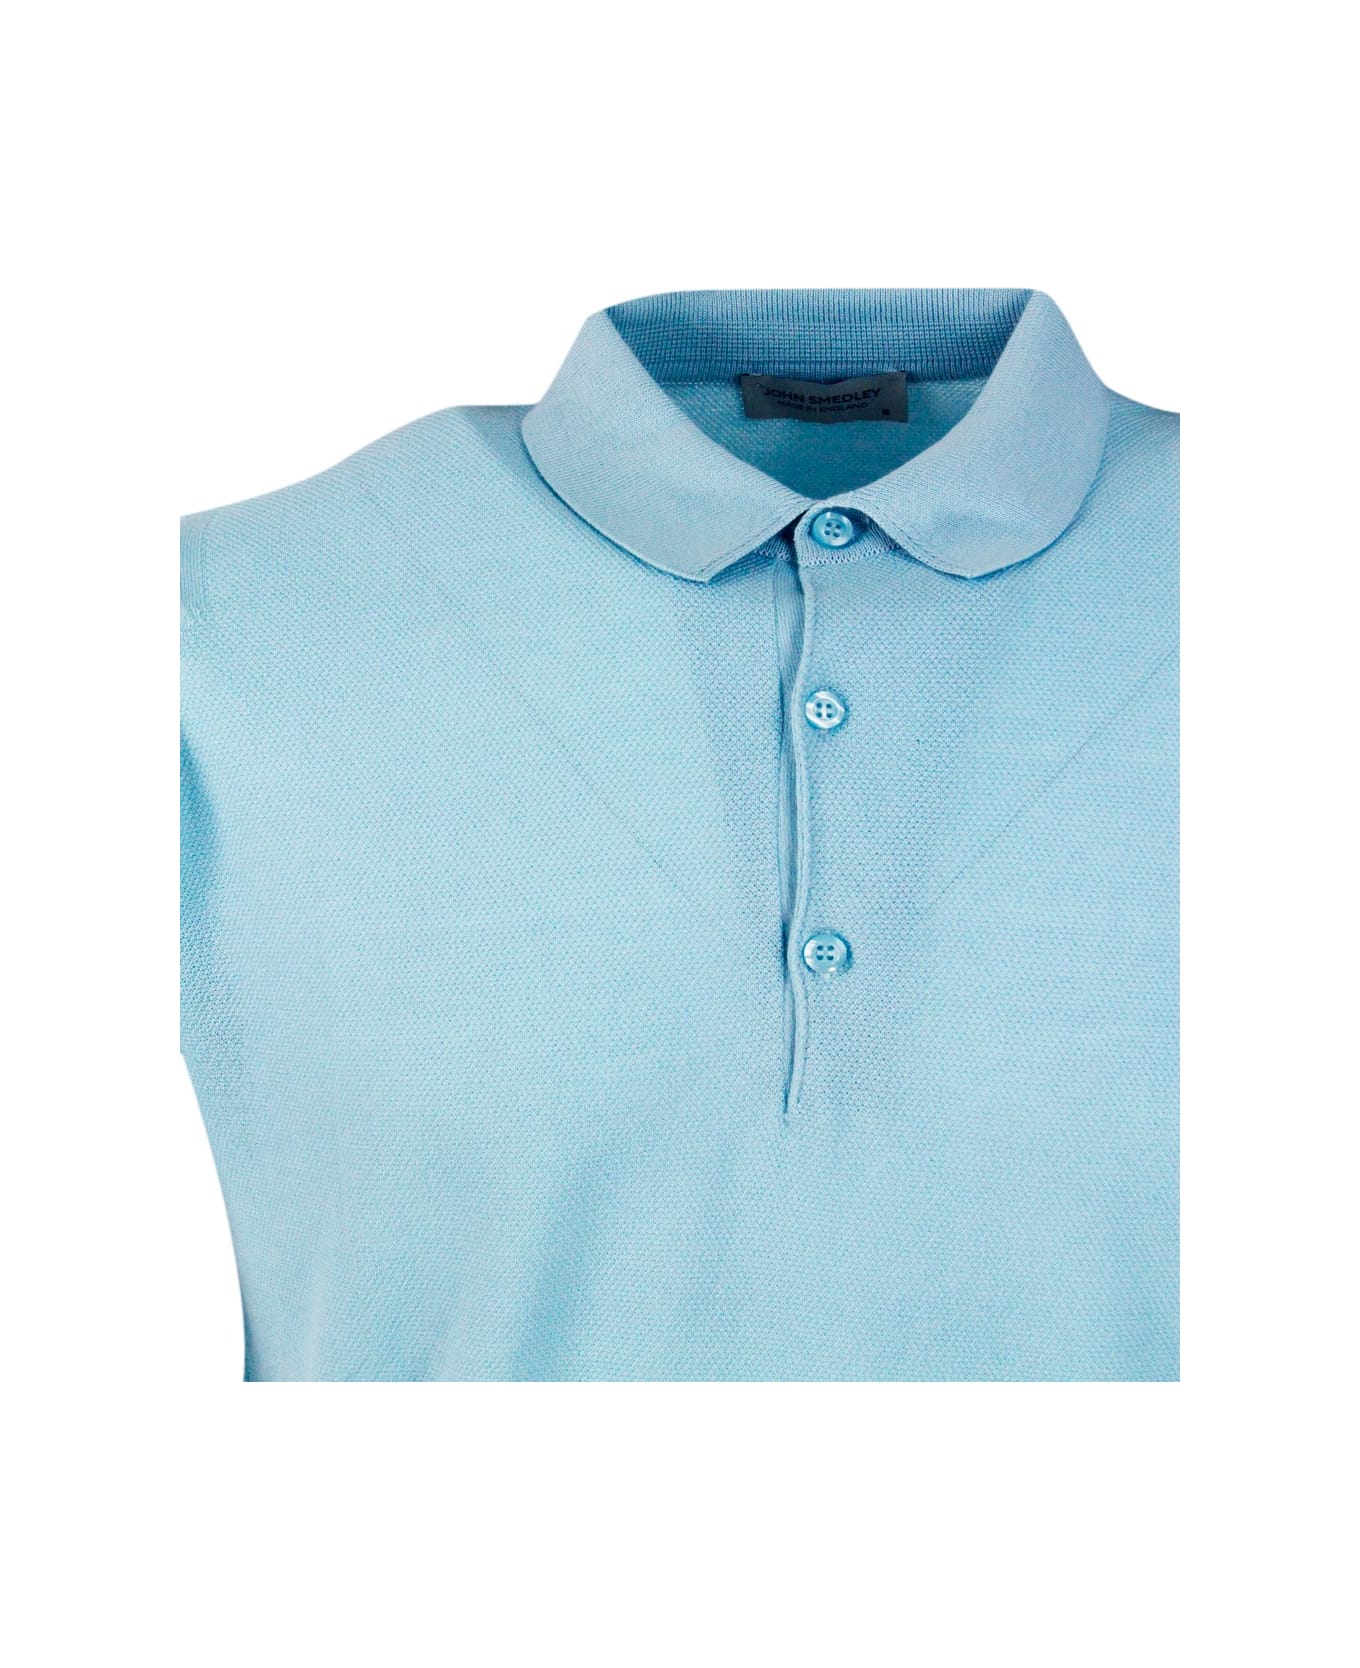 John Smedley Short-sleeved Polo Shirt In Extrafine Piqué Cotton Thread With Three Buttons - Blu ポロシャツ